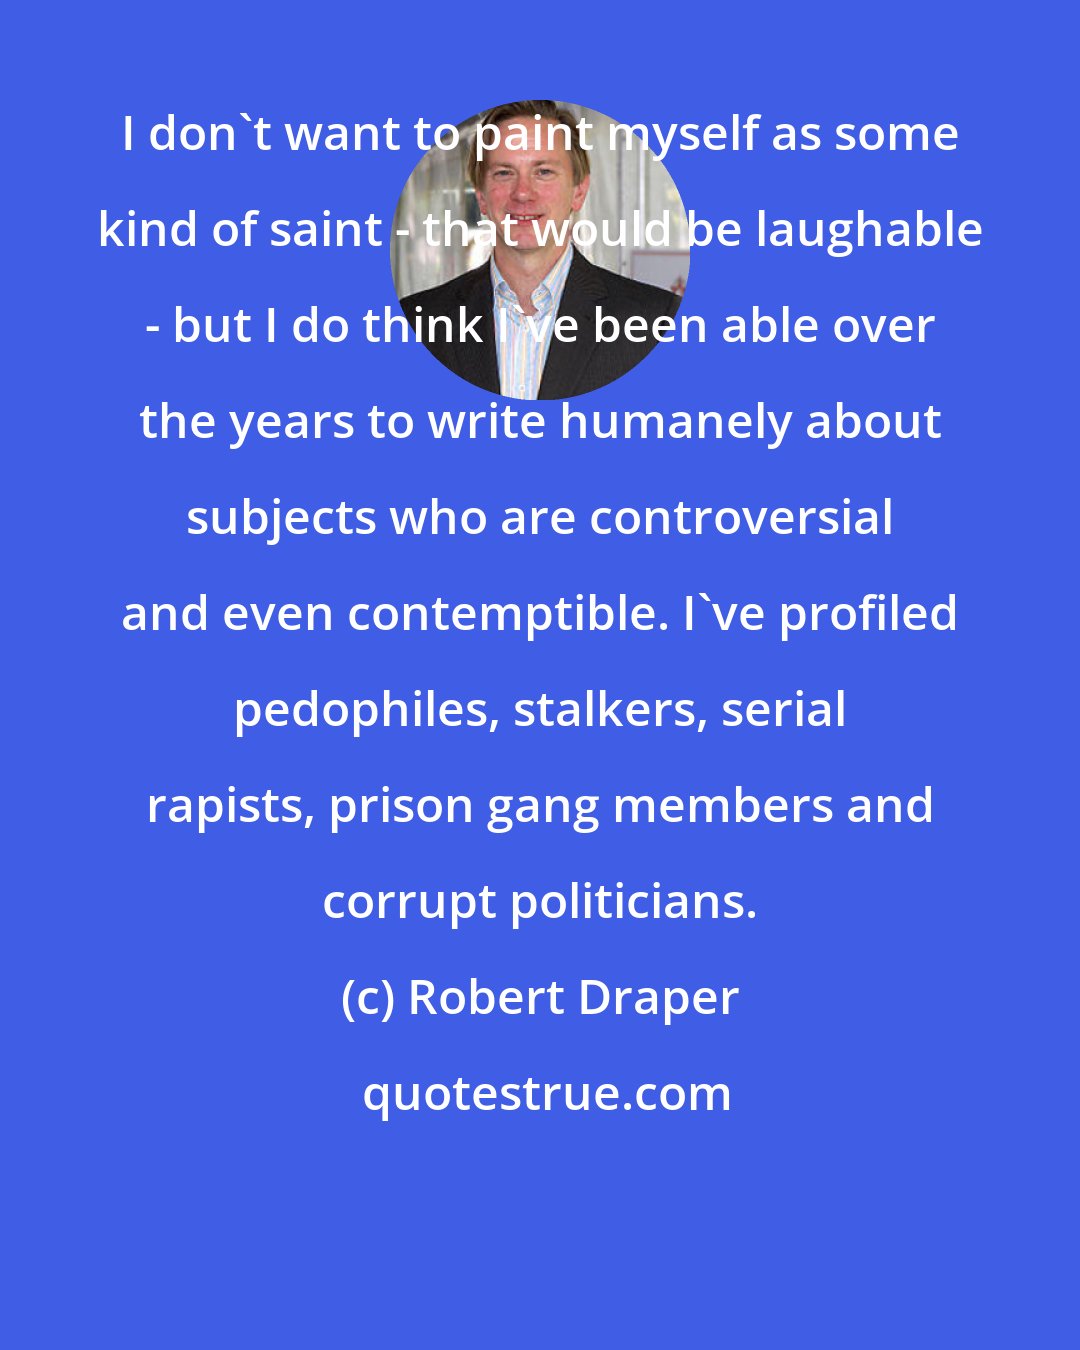 Robert Draper: I don't want to paint myself as some kind of saint - that would be laughable - but I do think I've been able over the years to write humanely about subjects who are controversial and even contemptible. I've profiled pedophiles, stalkers, serial rapists, prison gang members and corrupt politicians.